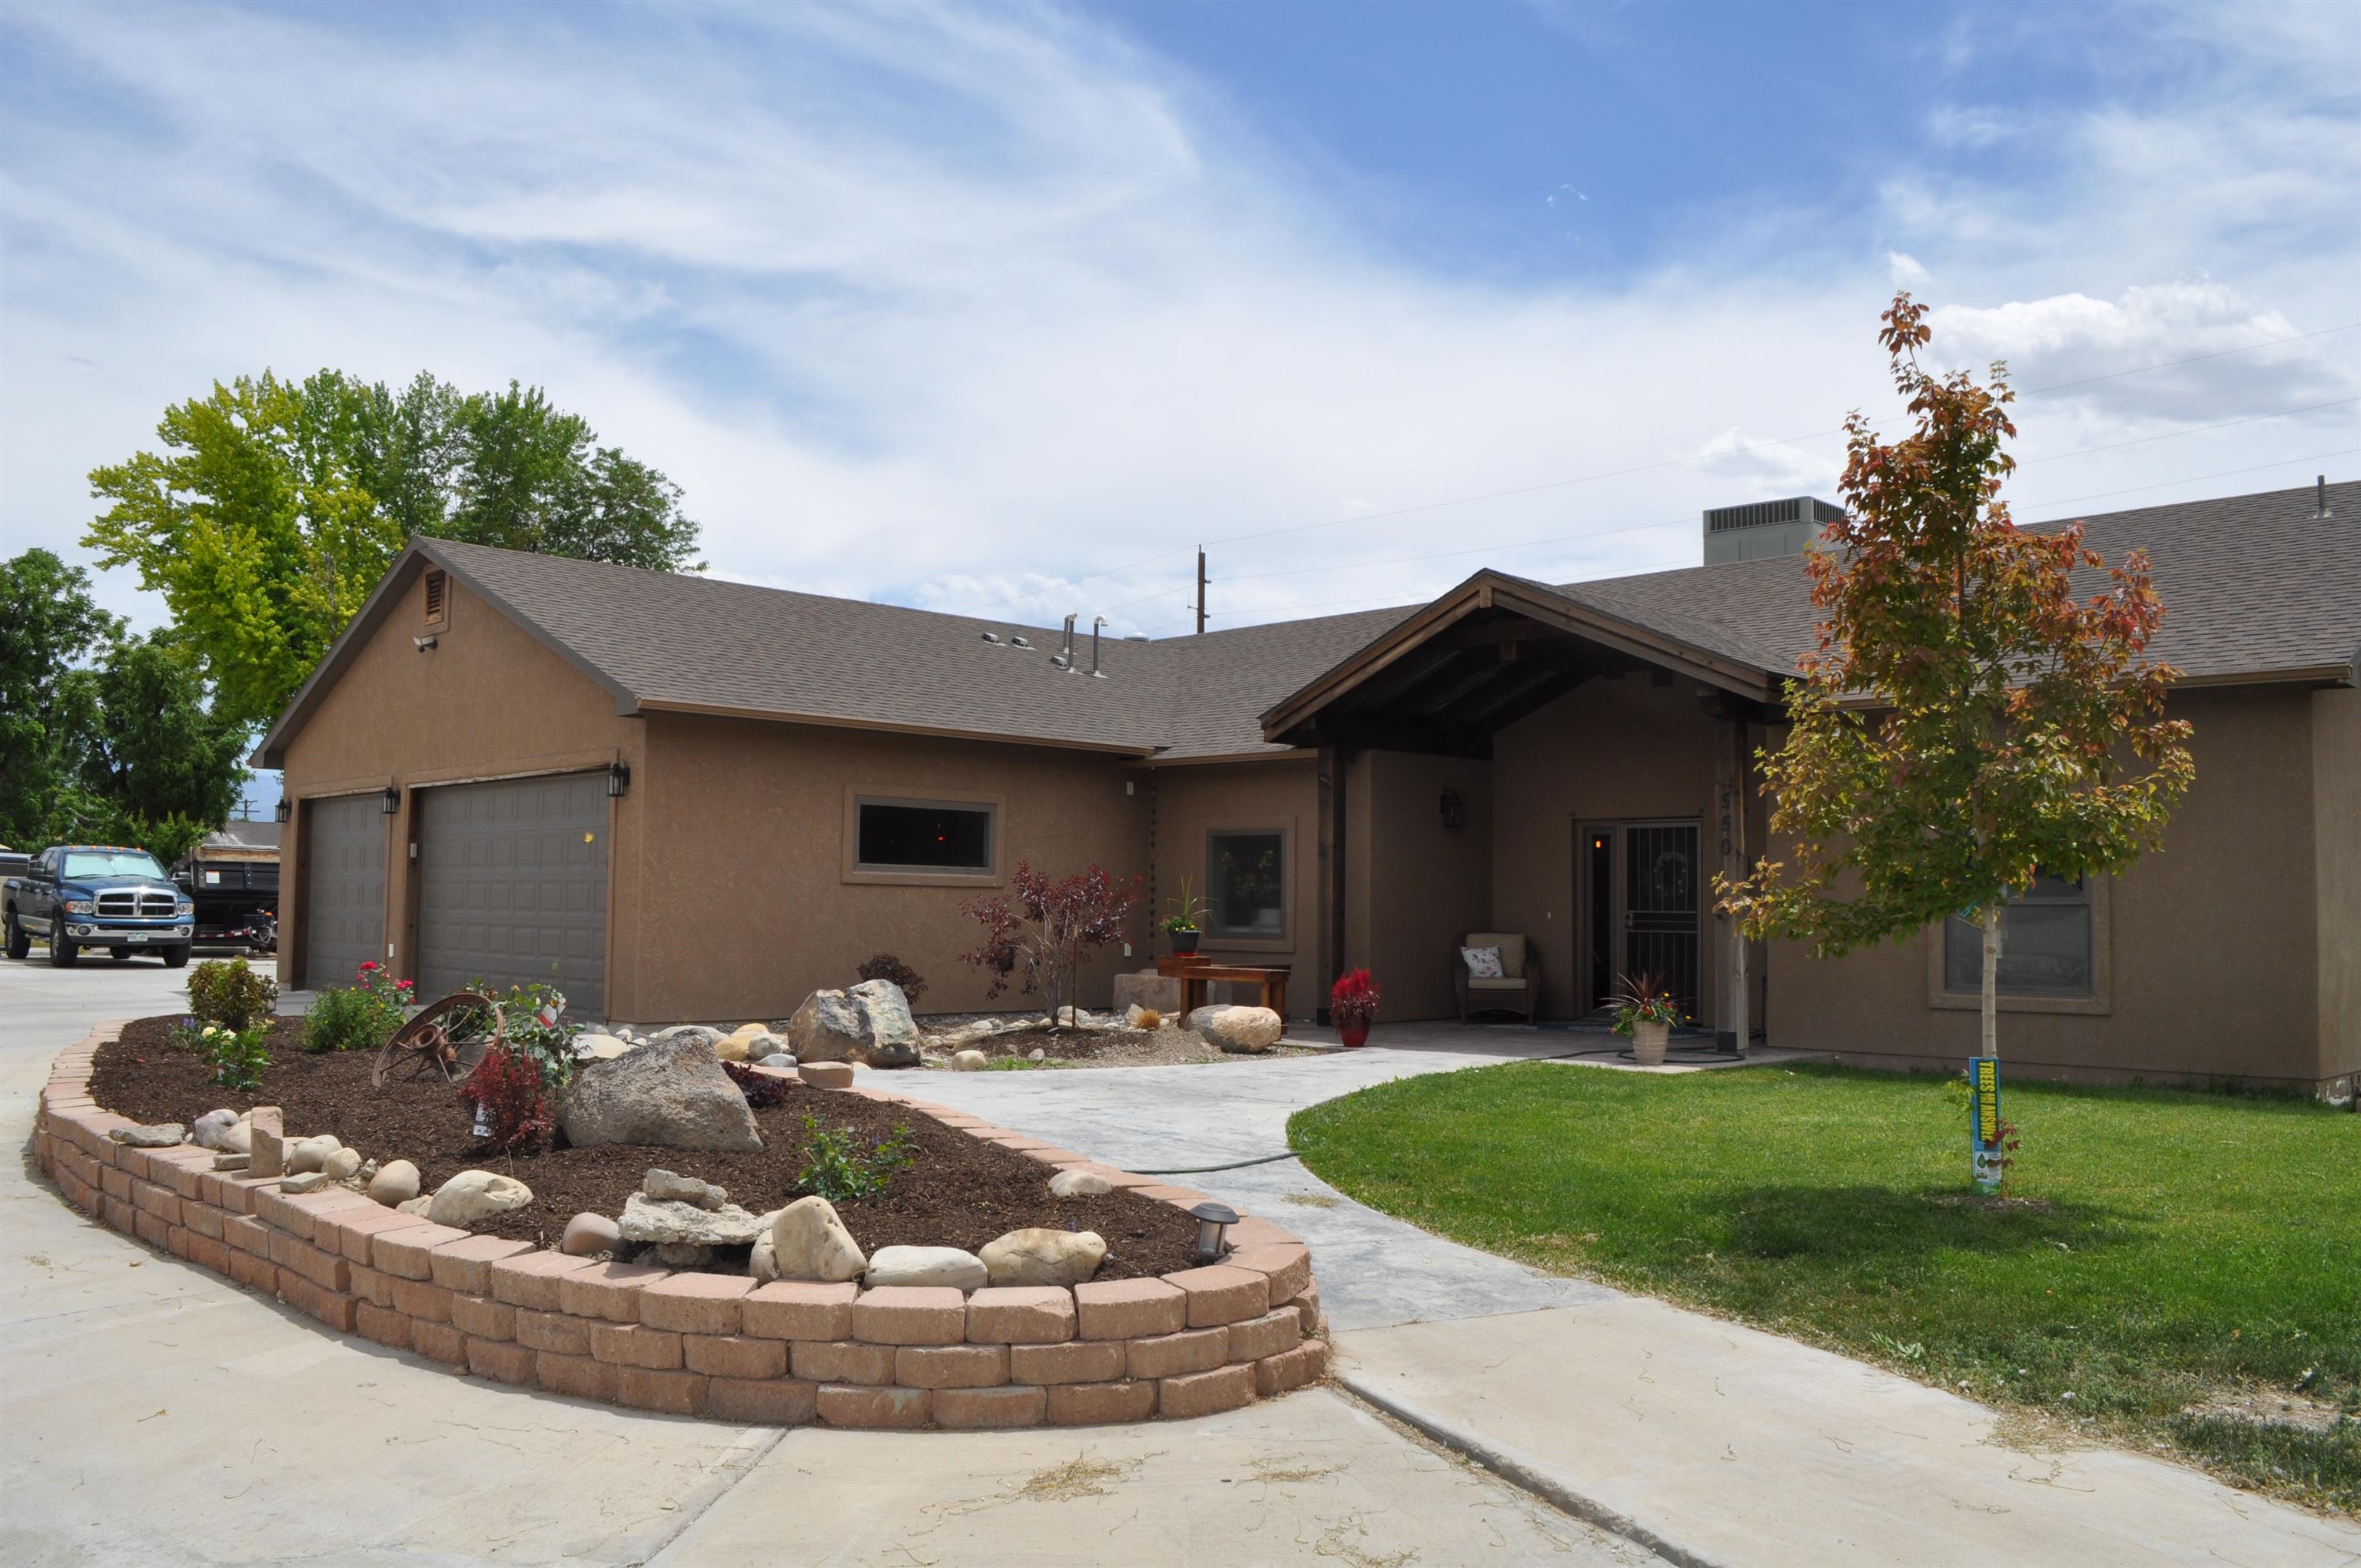 550 30 Road, Grand Junction, CO 